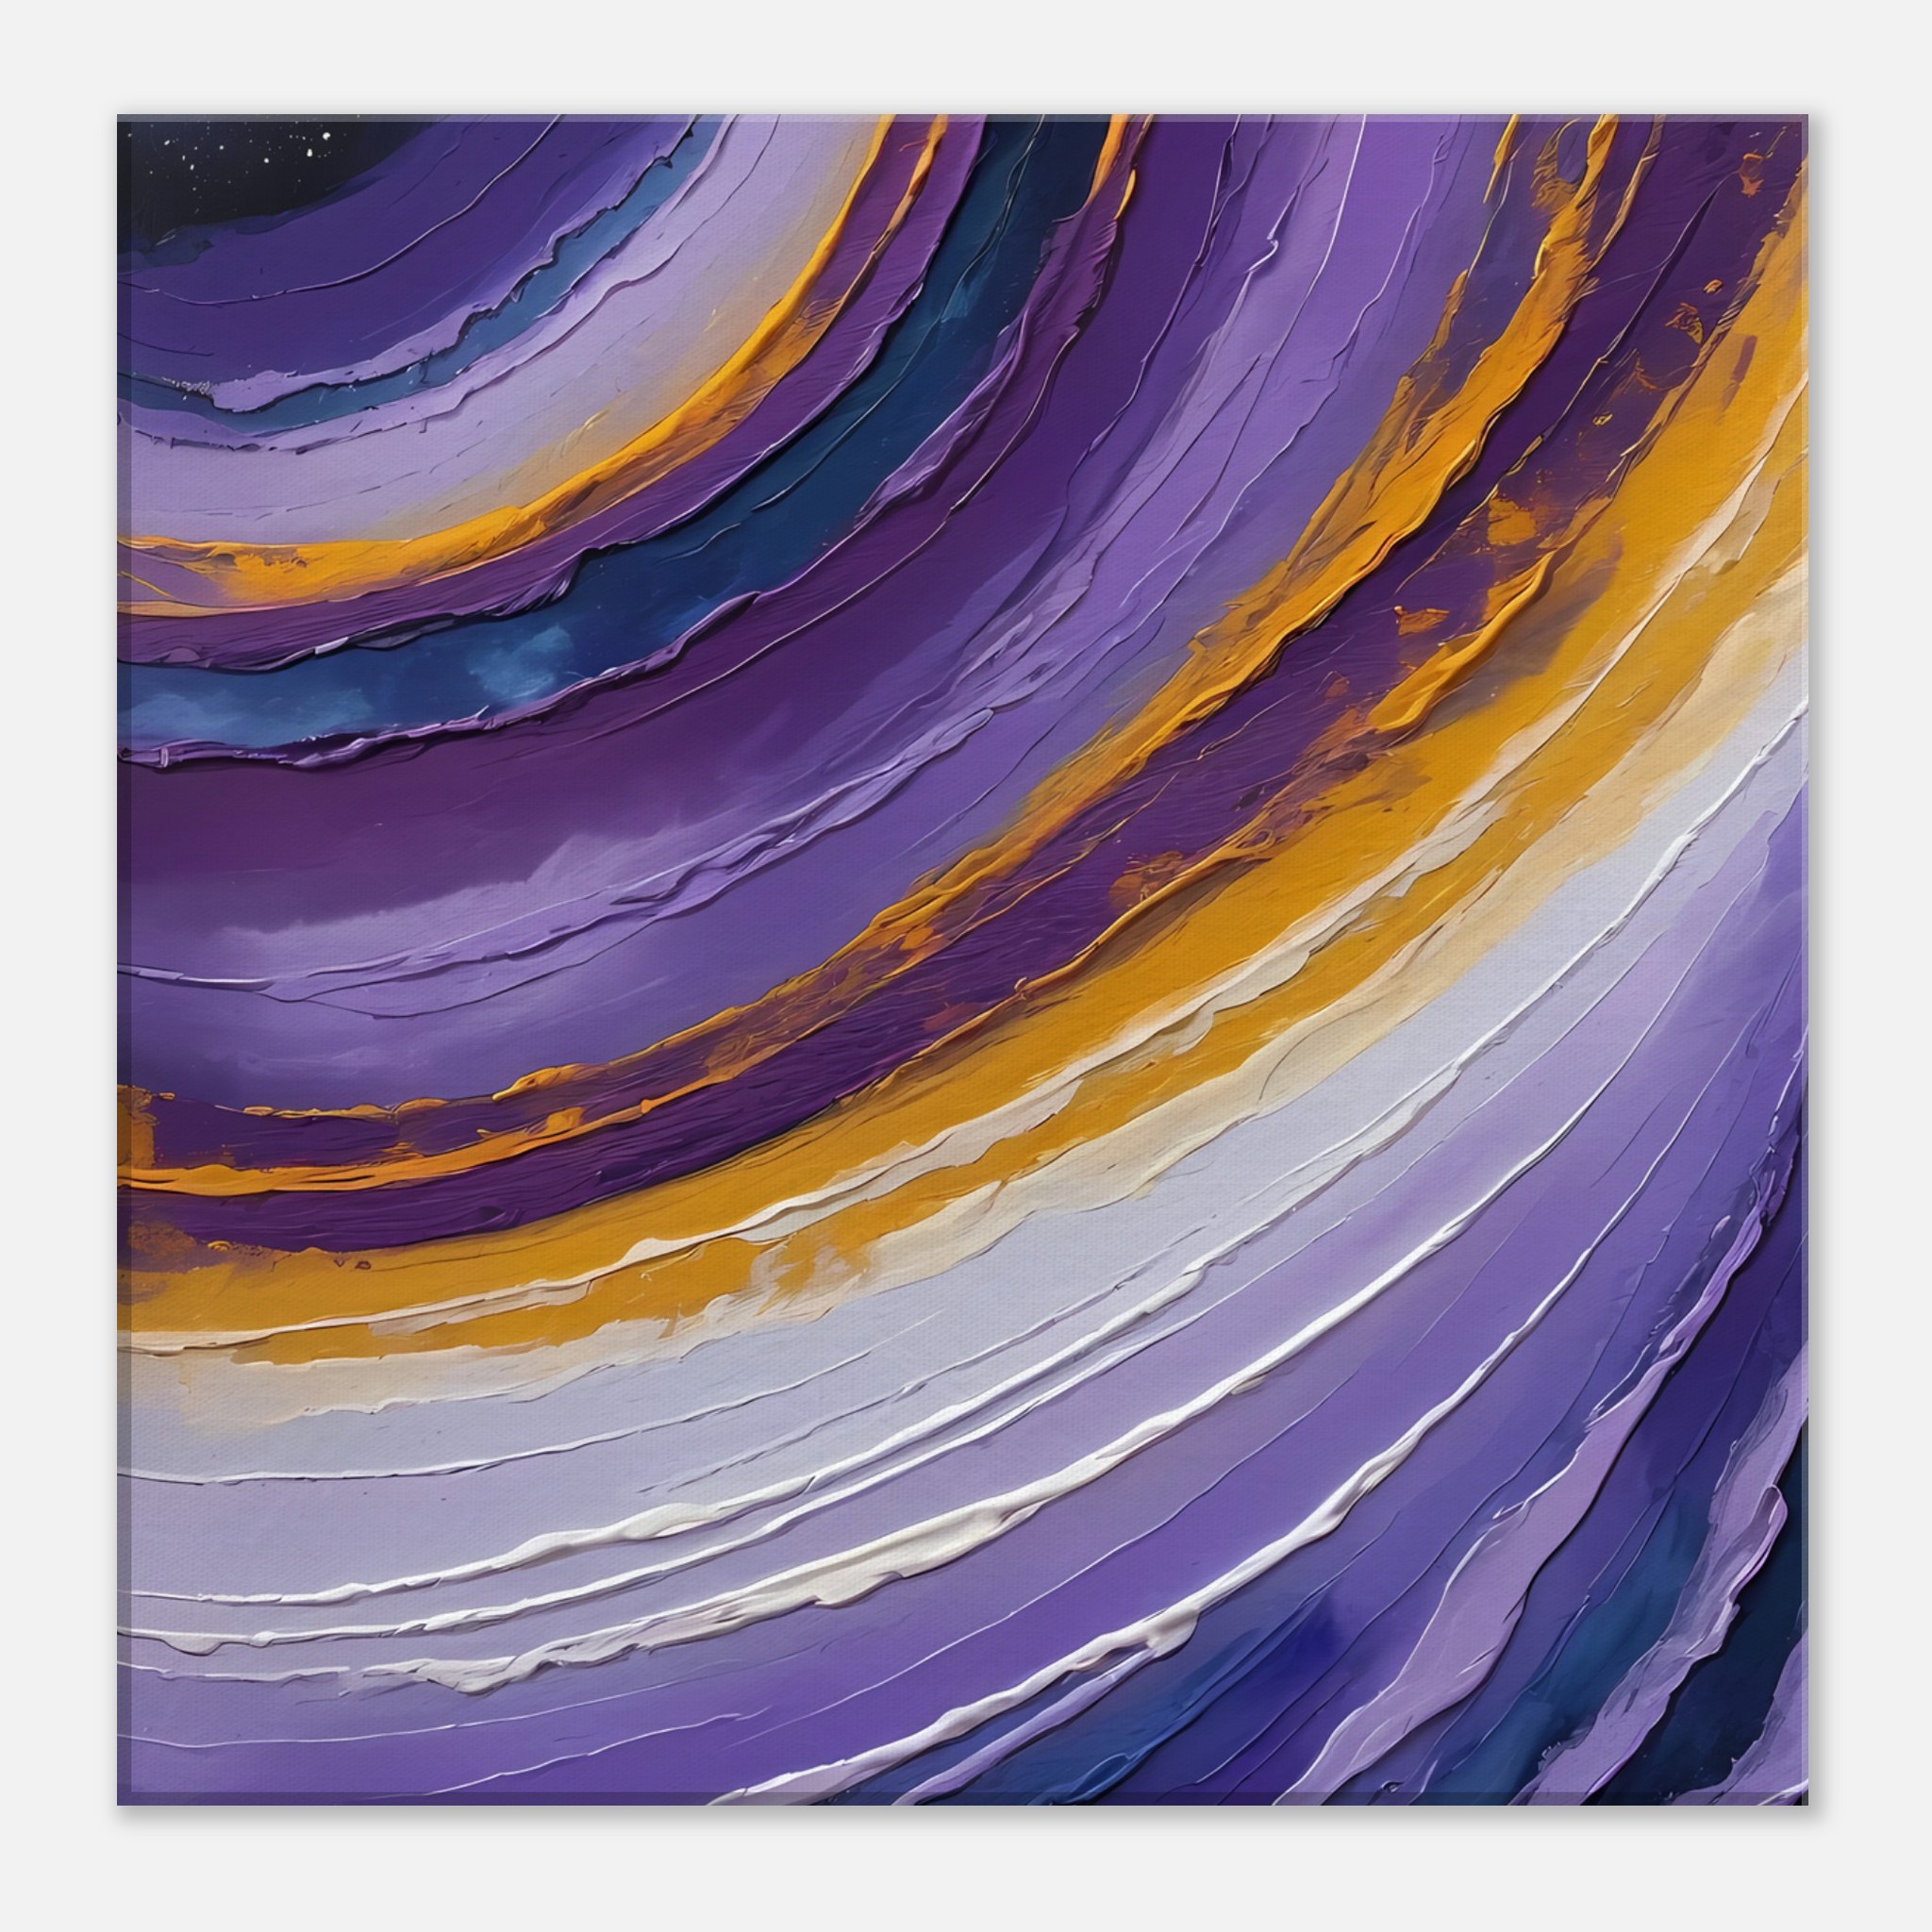 Ethereal Harmony: Swirling Purple Canvas for Zen Spaces